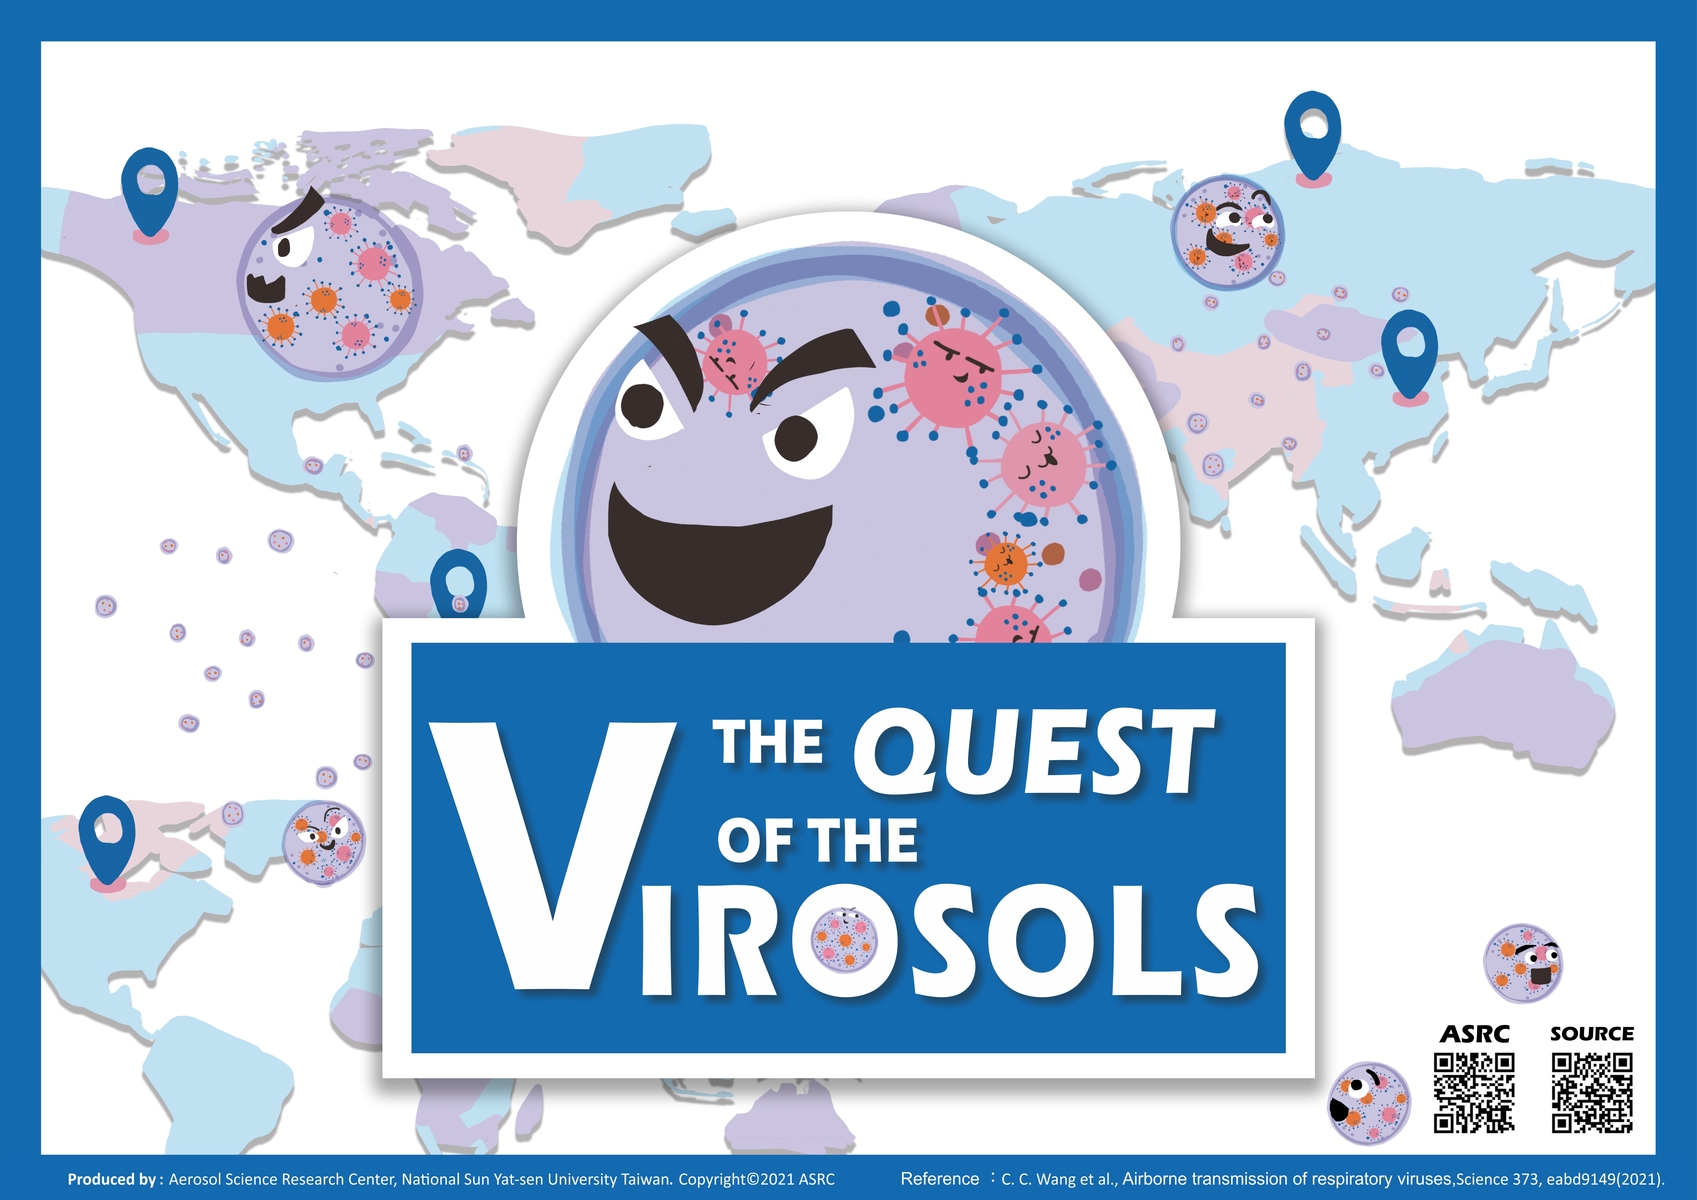 Aerosol Science Research Center at NSYSU, to help the general public and young students better understand the characteristics of virosols and preventive measures against their airborne spread, produced a series of popular science comics entitled "The Quest of the Virosols”, which explains the scientific mechanism of airborne transmission (aerosol transmission) and its preventive measures. The 16 comic strips have been translated into 20 languages and are now available all over the world.